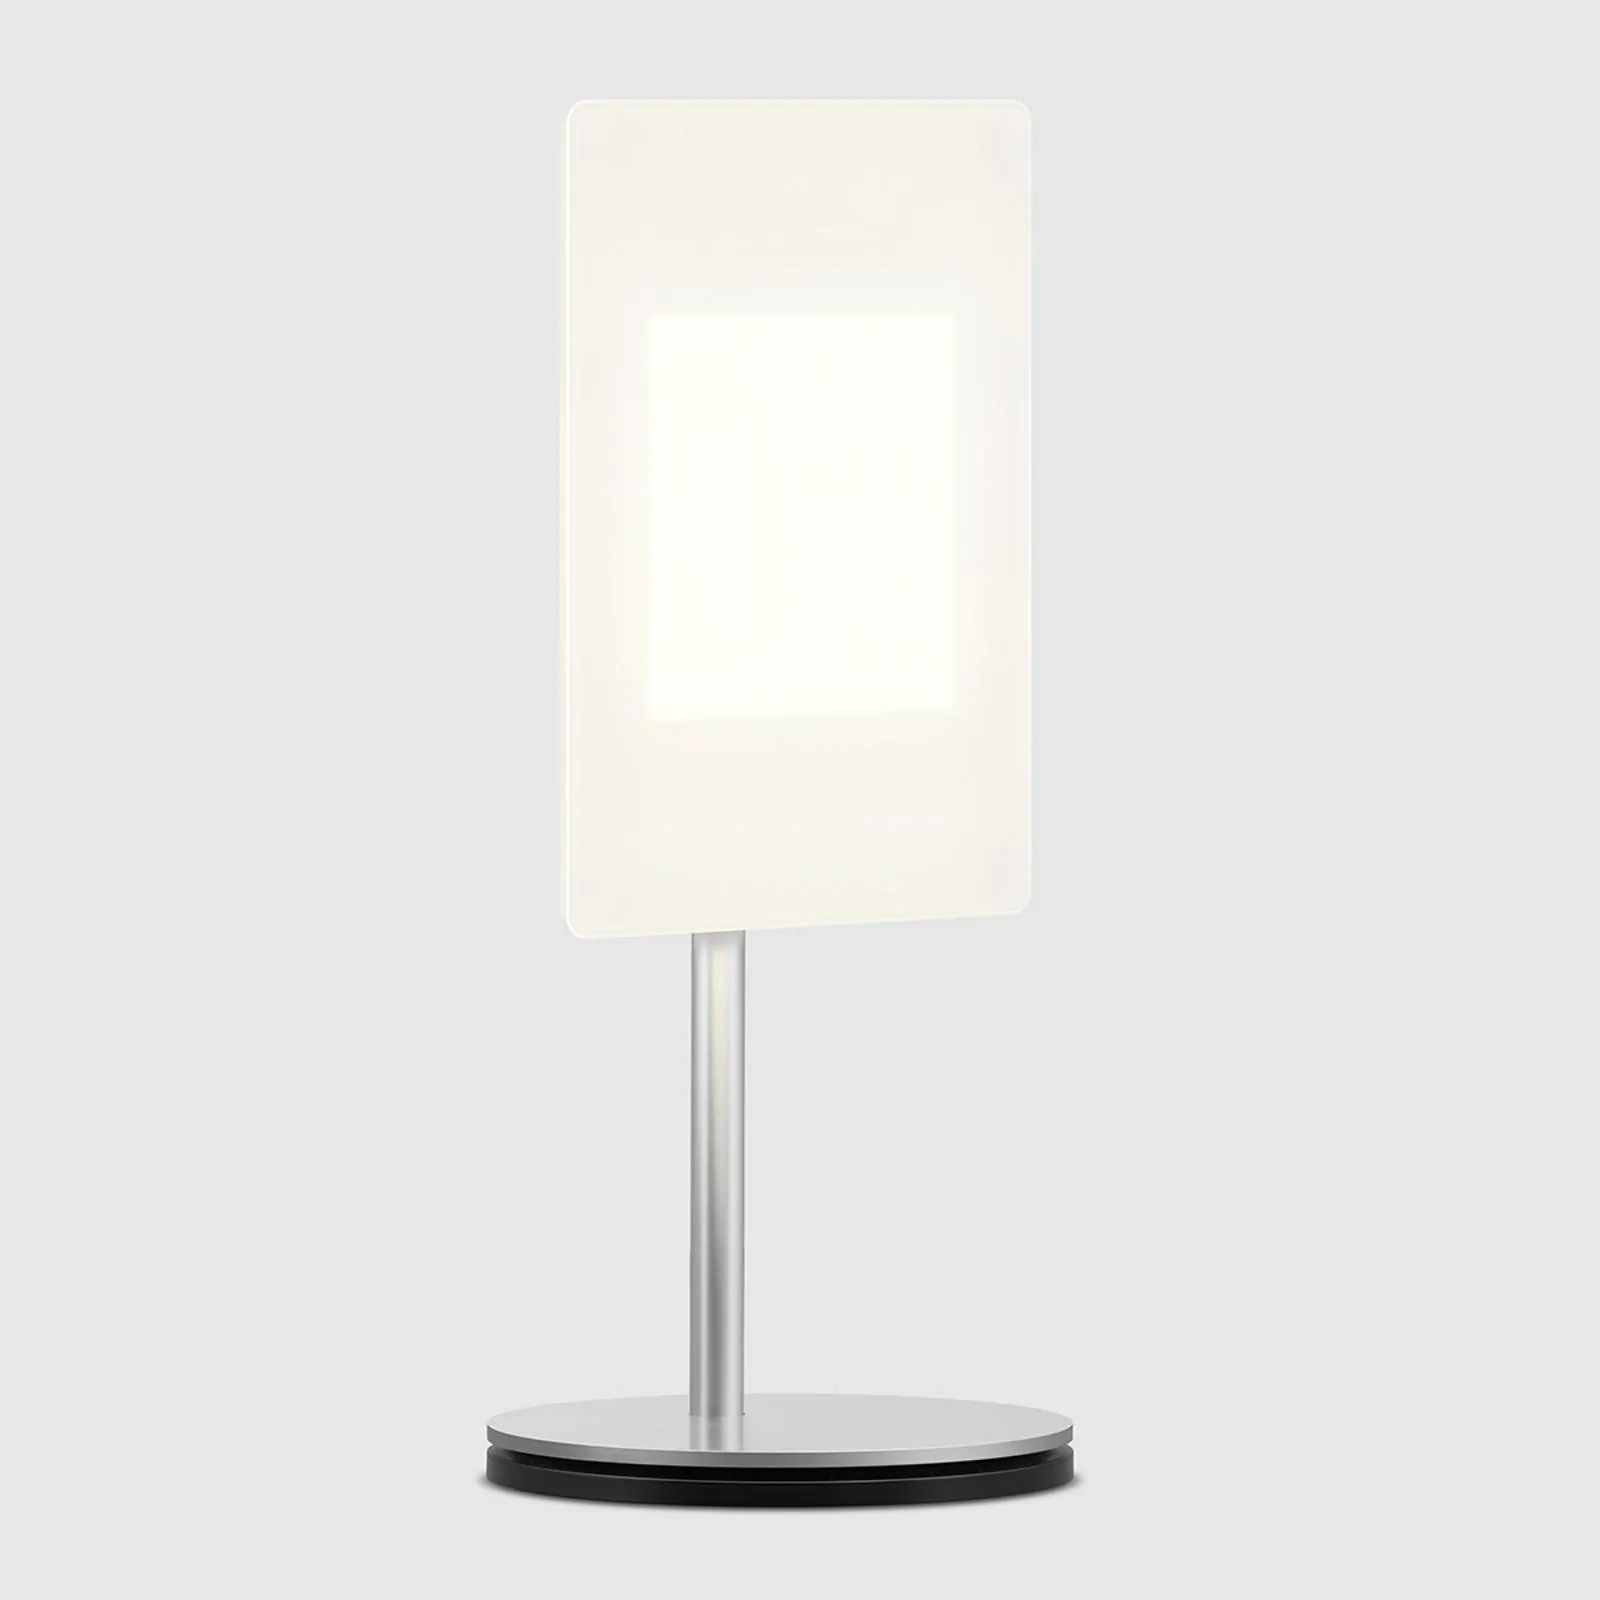 OLED table lamp OMLED One t1 with OLEDs, white